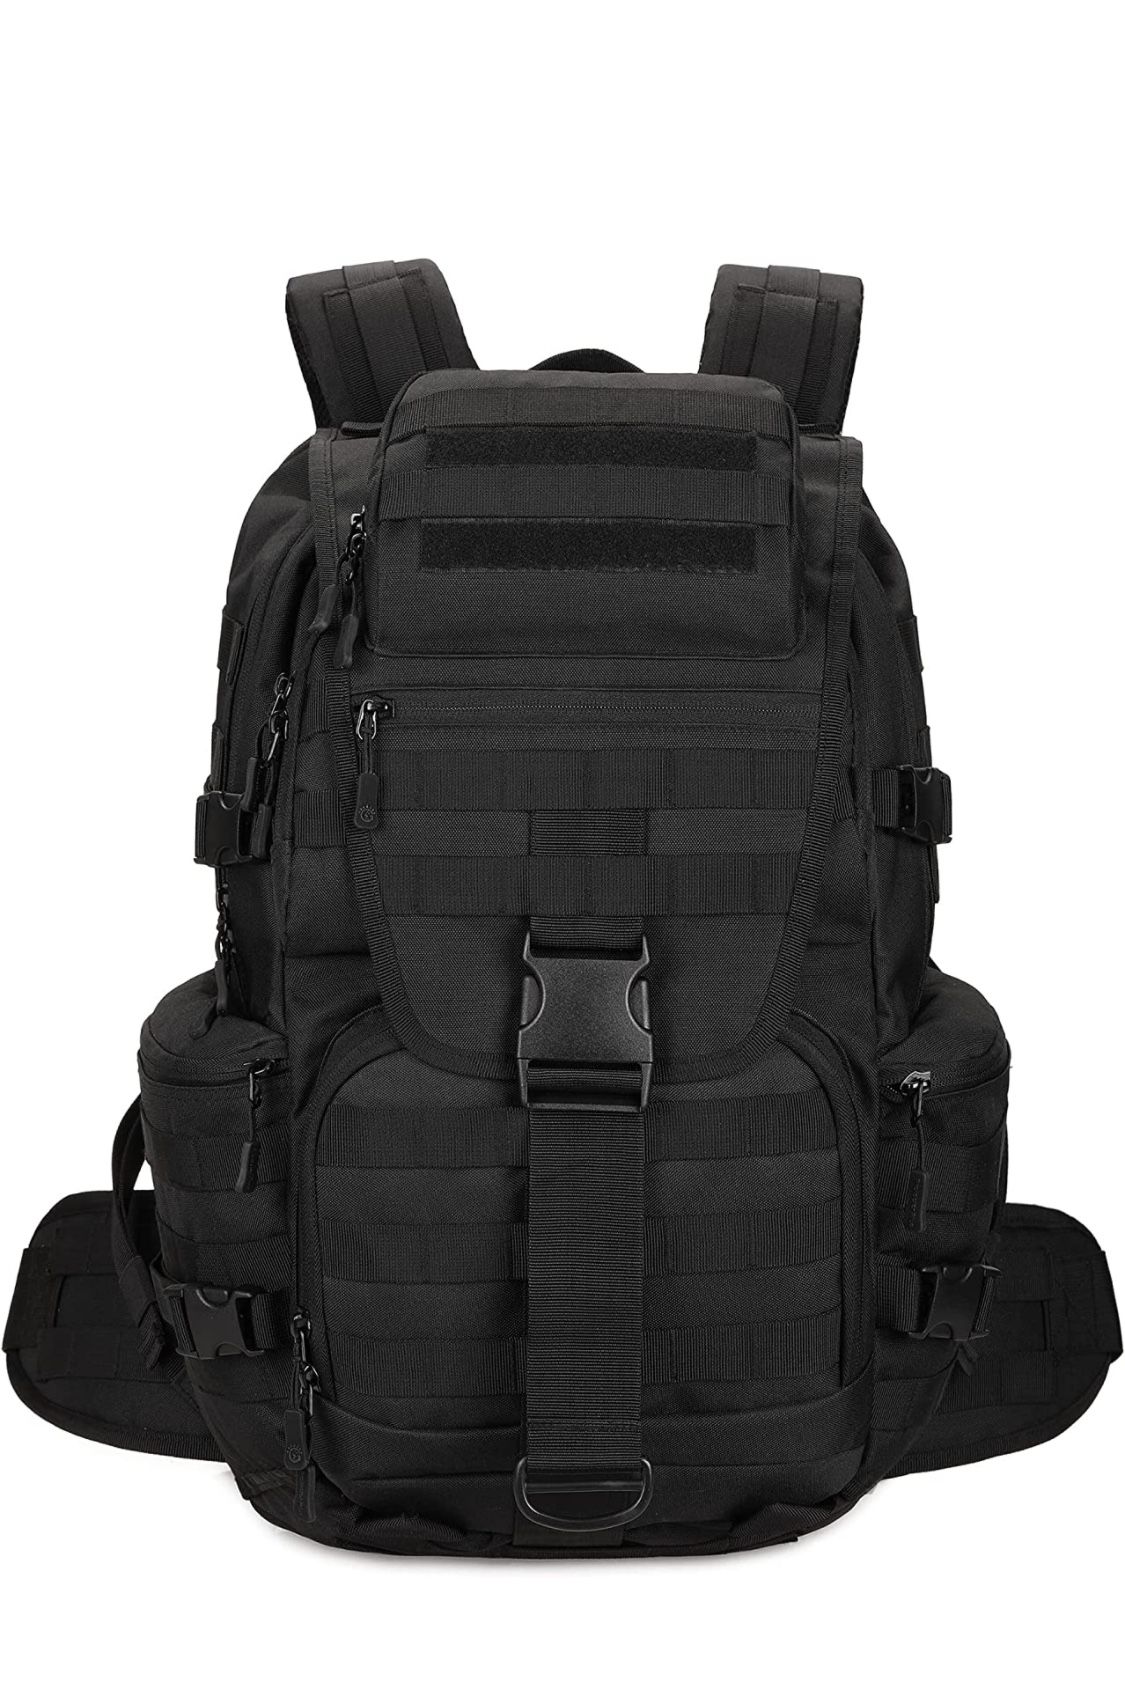 Military Tactical Backpack Large-Black